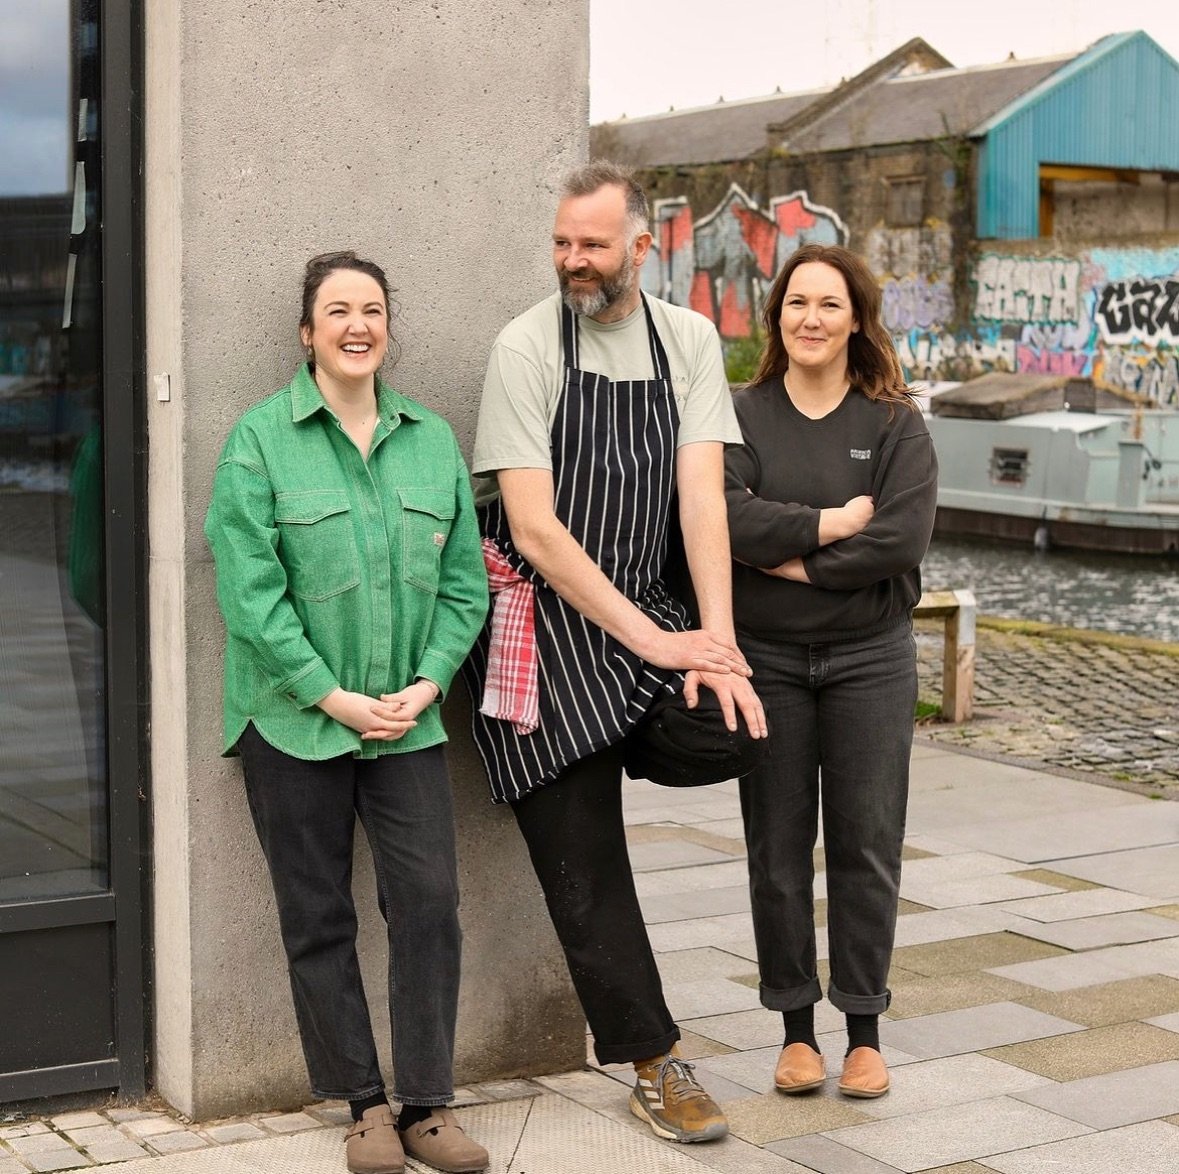 To say I&rsquo;m excited to be helping to launch @inisfishisland would be an understatement. Lynsey (my legend of a former boss at The Ginger Pig) and her partner Lindsay (equally legendary) are opening a new eatery in Hackney Wick&rsquo;s Fish Islan